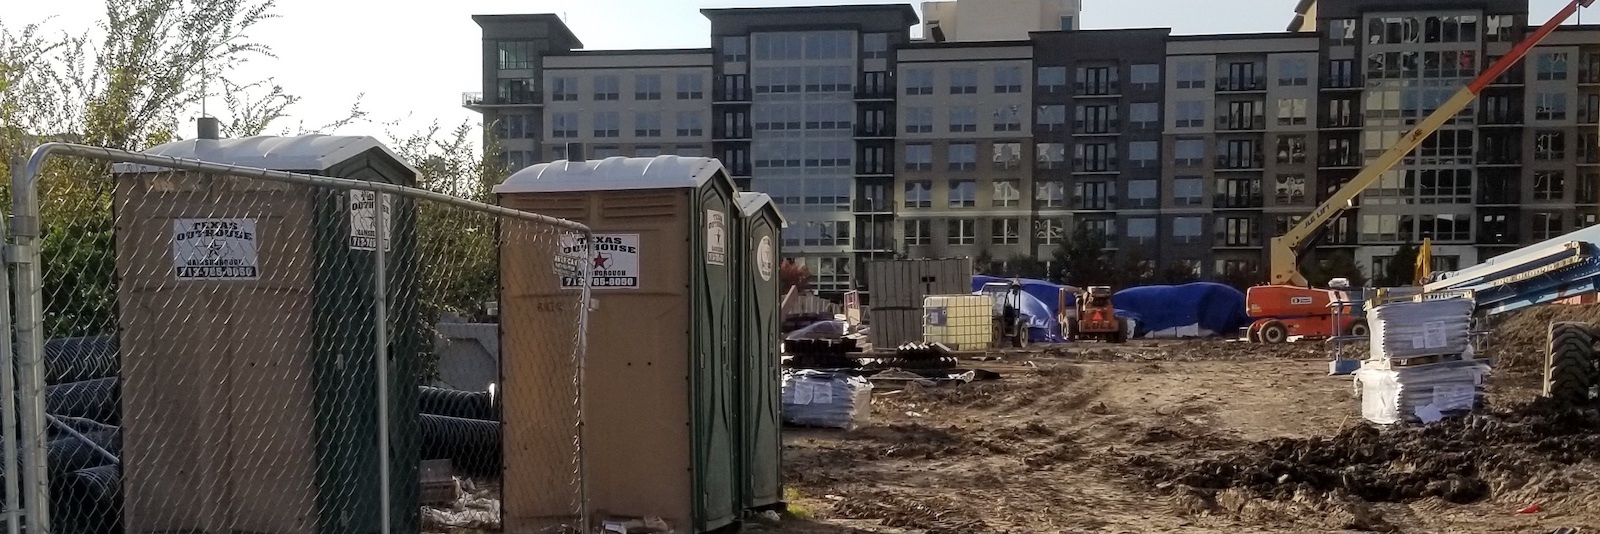 Portable toilets are stationed at a construction site in Houston